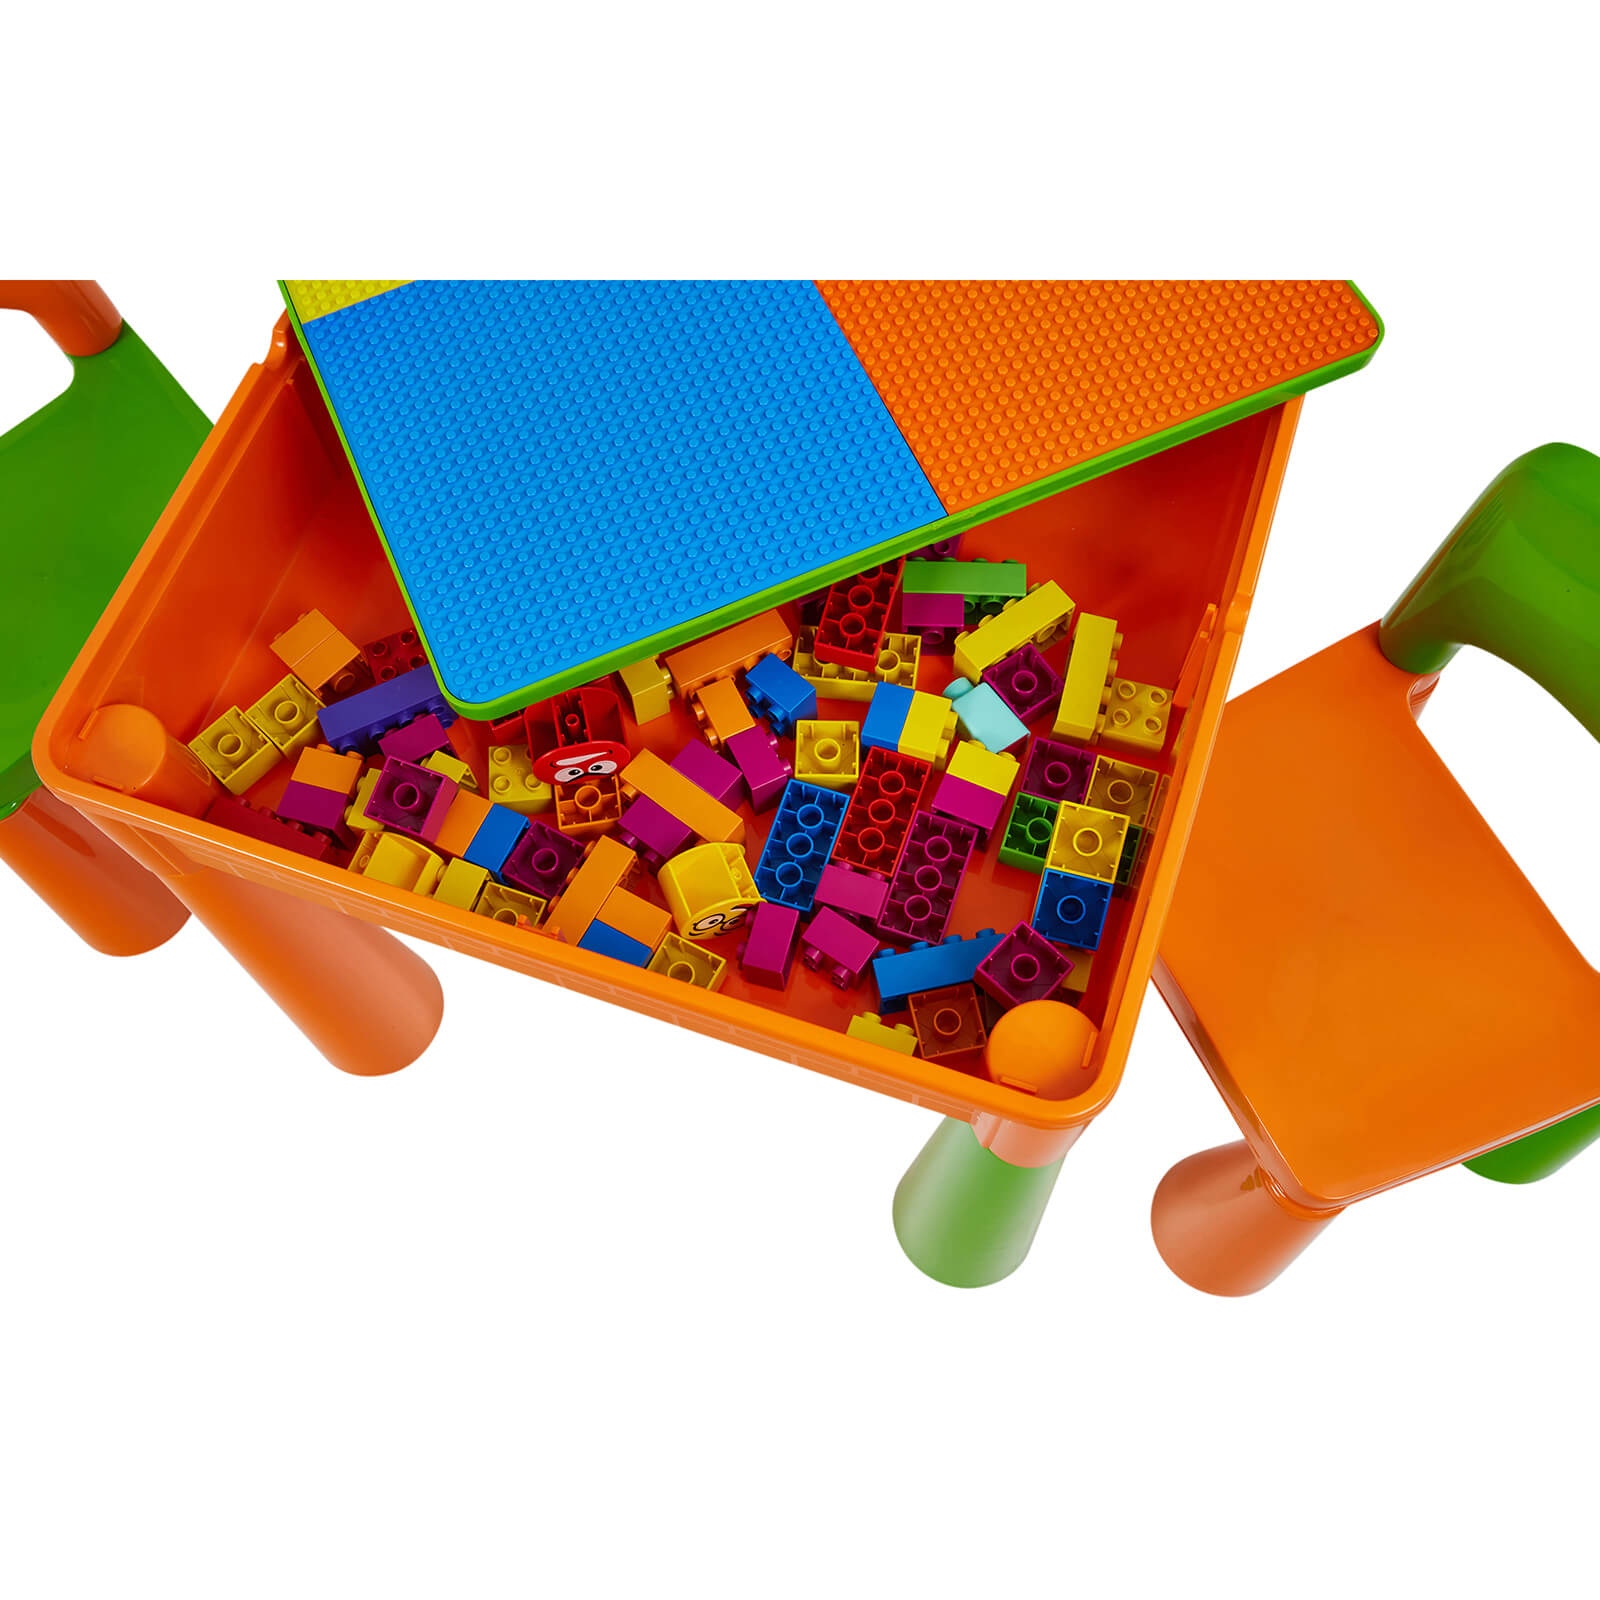 Green Orange Activity Table And 2 Chairs